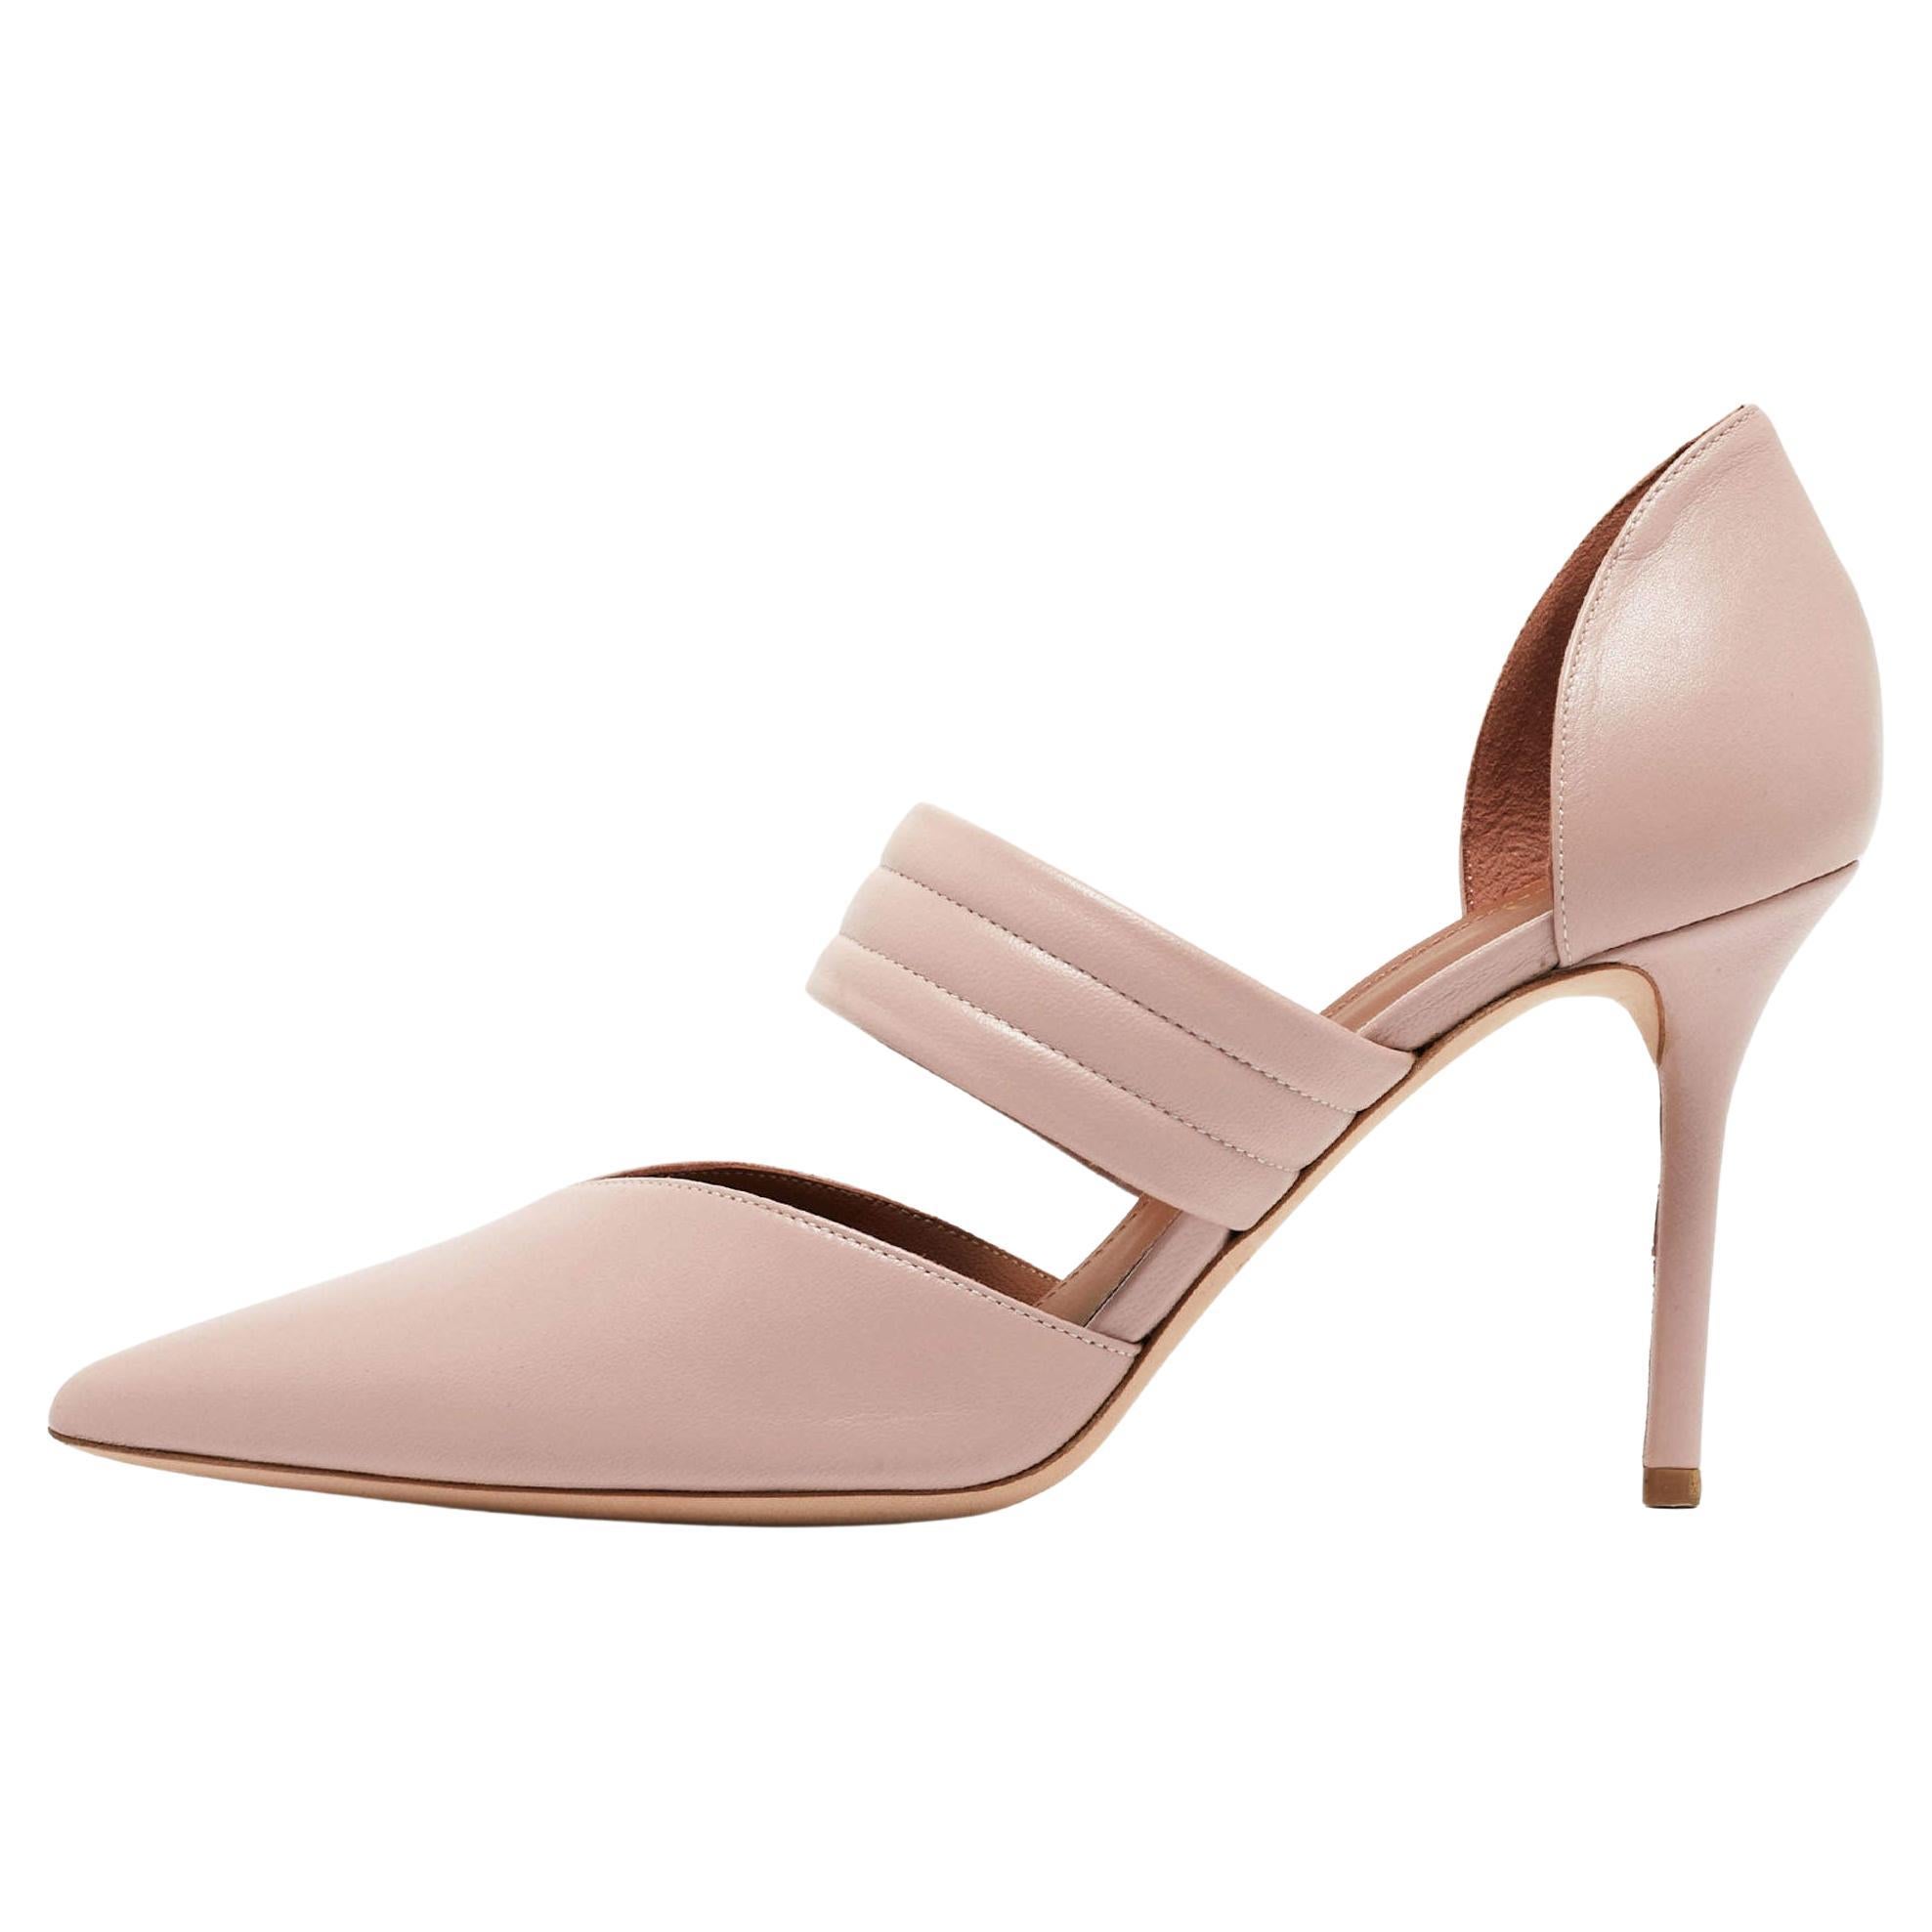 Malone Souliers Pink Leather Mida Pumps Size 40 For Sale